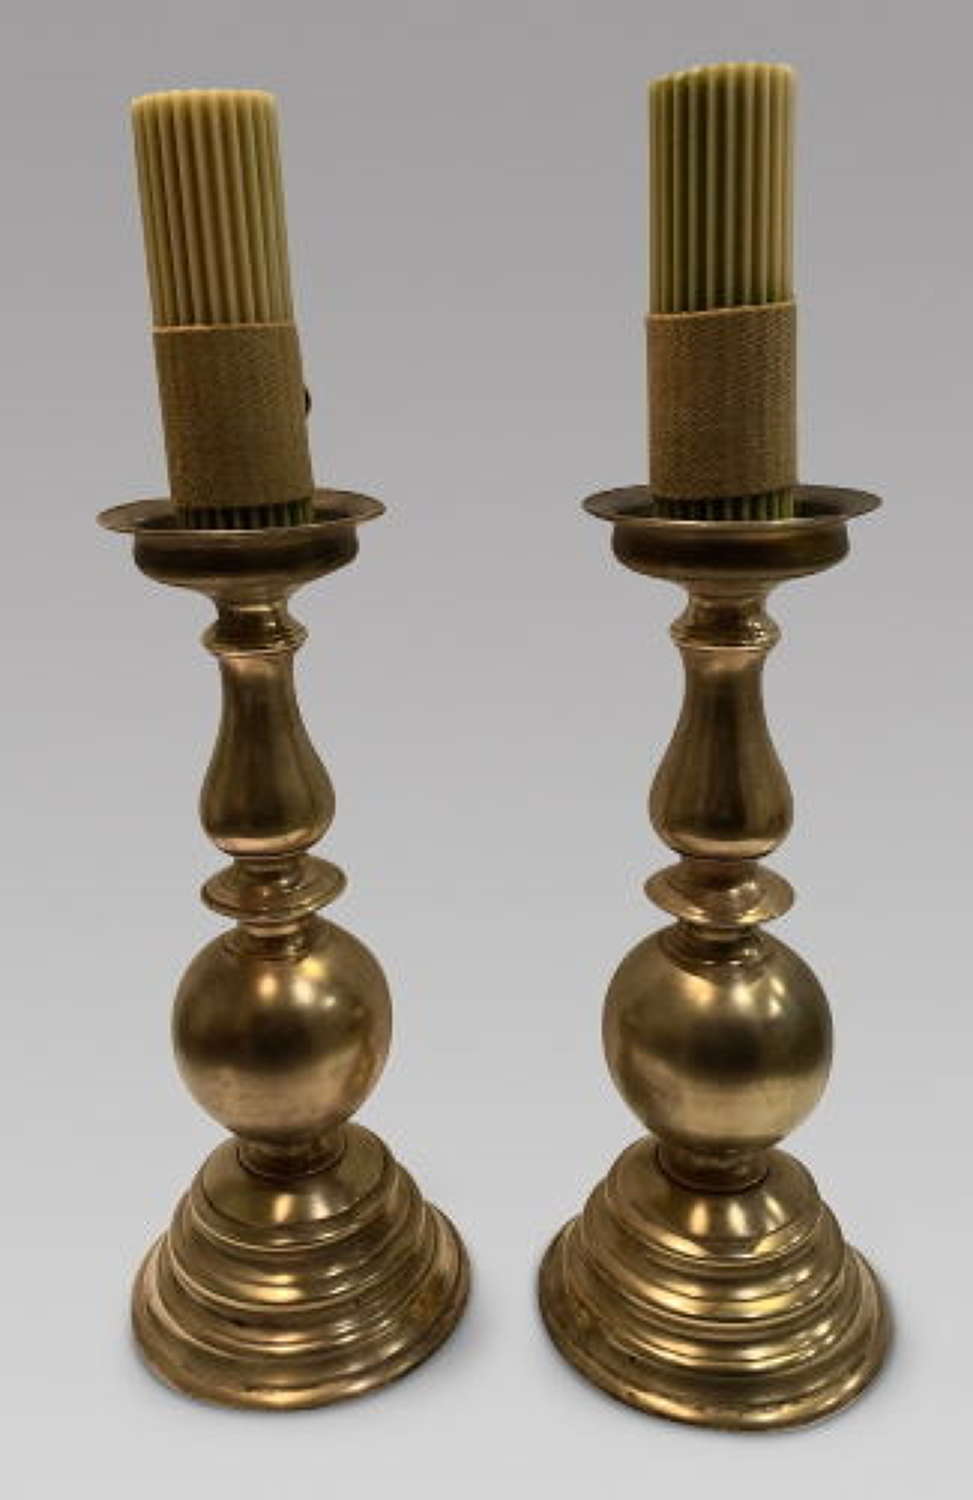 Pair of Turned Large Brass Pricket Candlesticks